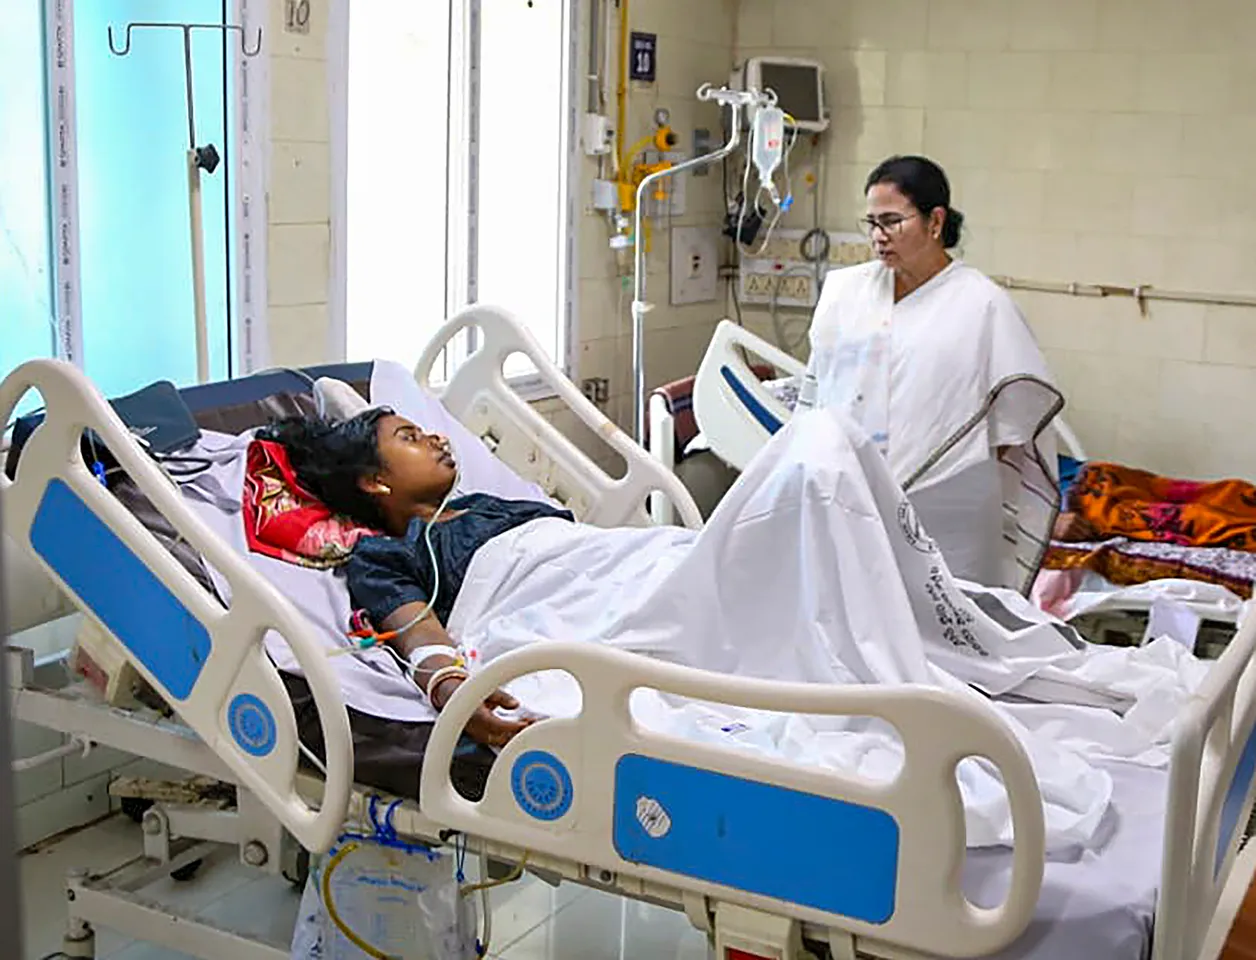 West Bengal Chief Minister Mamata Banerjee meets a passenger injured in the triple-train accident, at a hospital in Cuttack